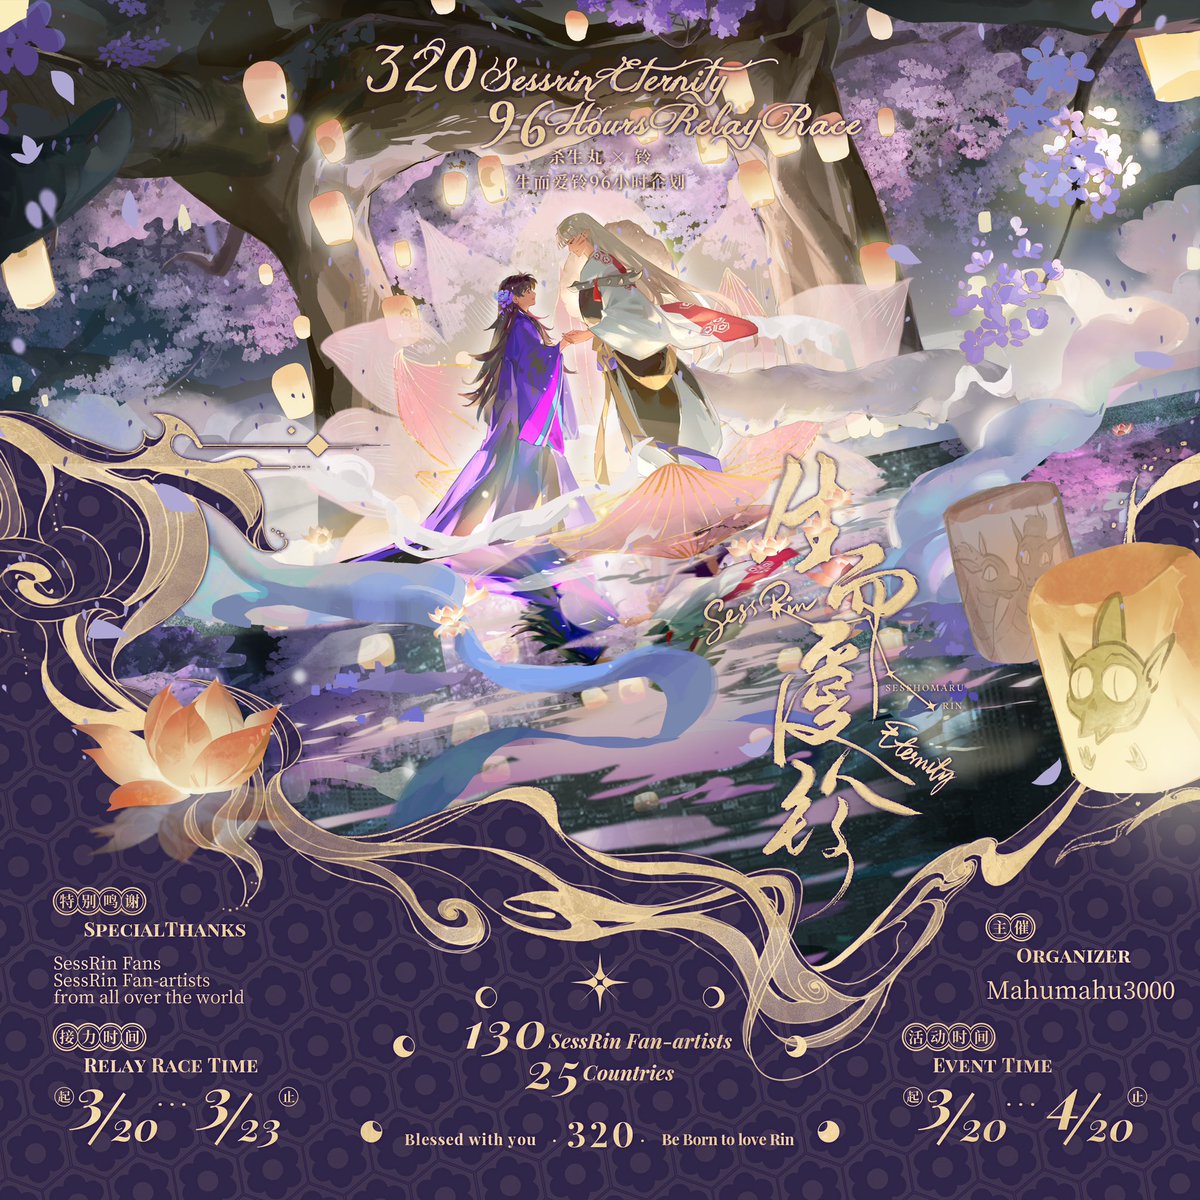 Filled with blessings and love, we embark on the #SessRinEternity and #生而爱铃96H journey again for 320 SessRinDays. We will start our 96-hour relay race journey from 3/20 to 3/23. All 130 of our great artists from 25 countries will display their love and passion at this…